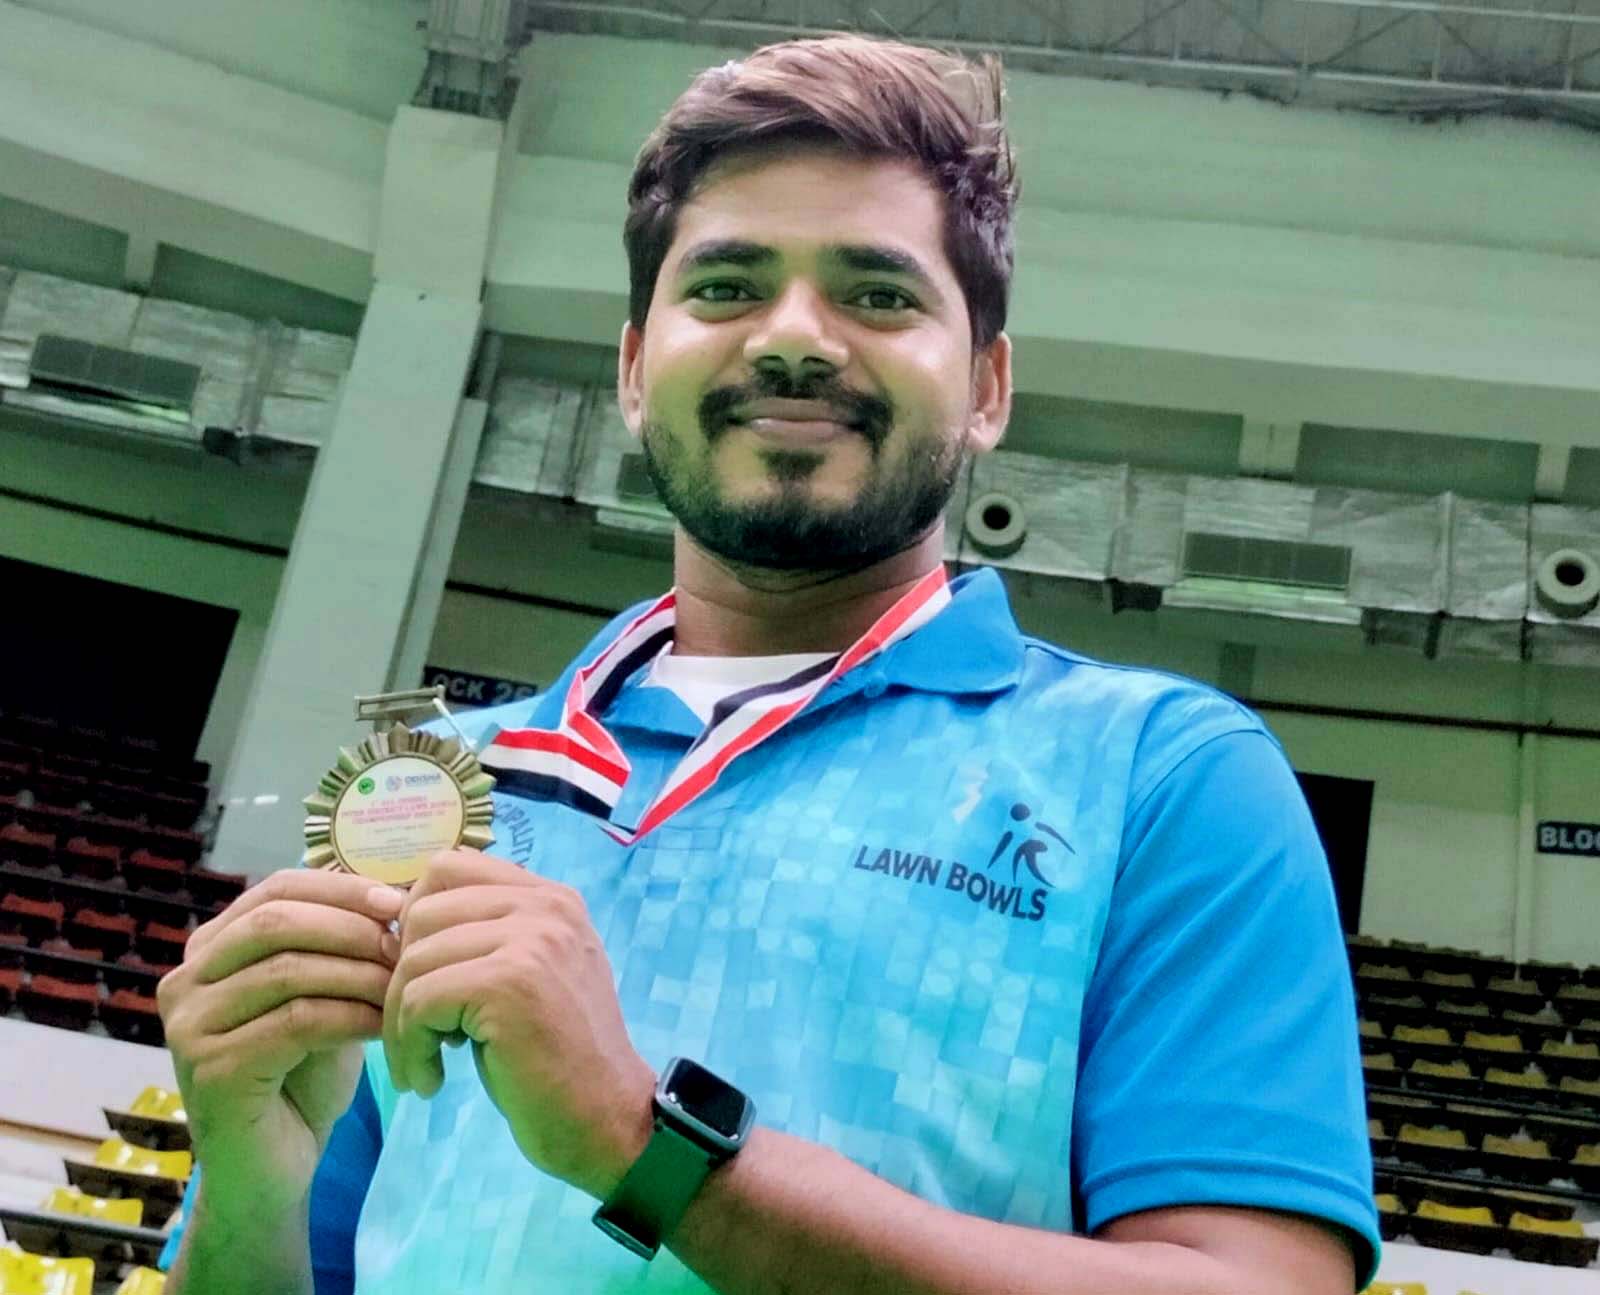 Odisha lawn bowling player Dinesh Nanda poses with his medal at the 1st All-Odisha Inter-District Lawn Bowls Championship in Cuttack on 3 April 2023.